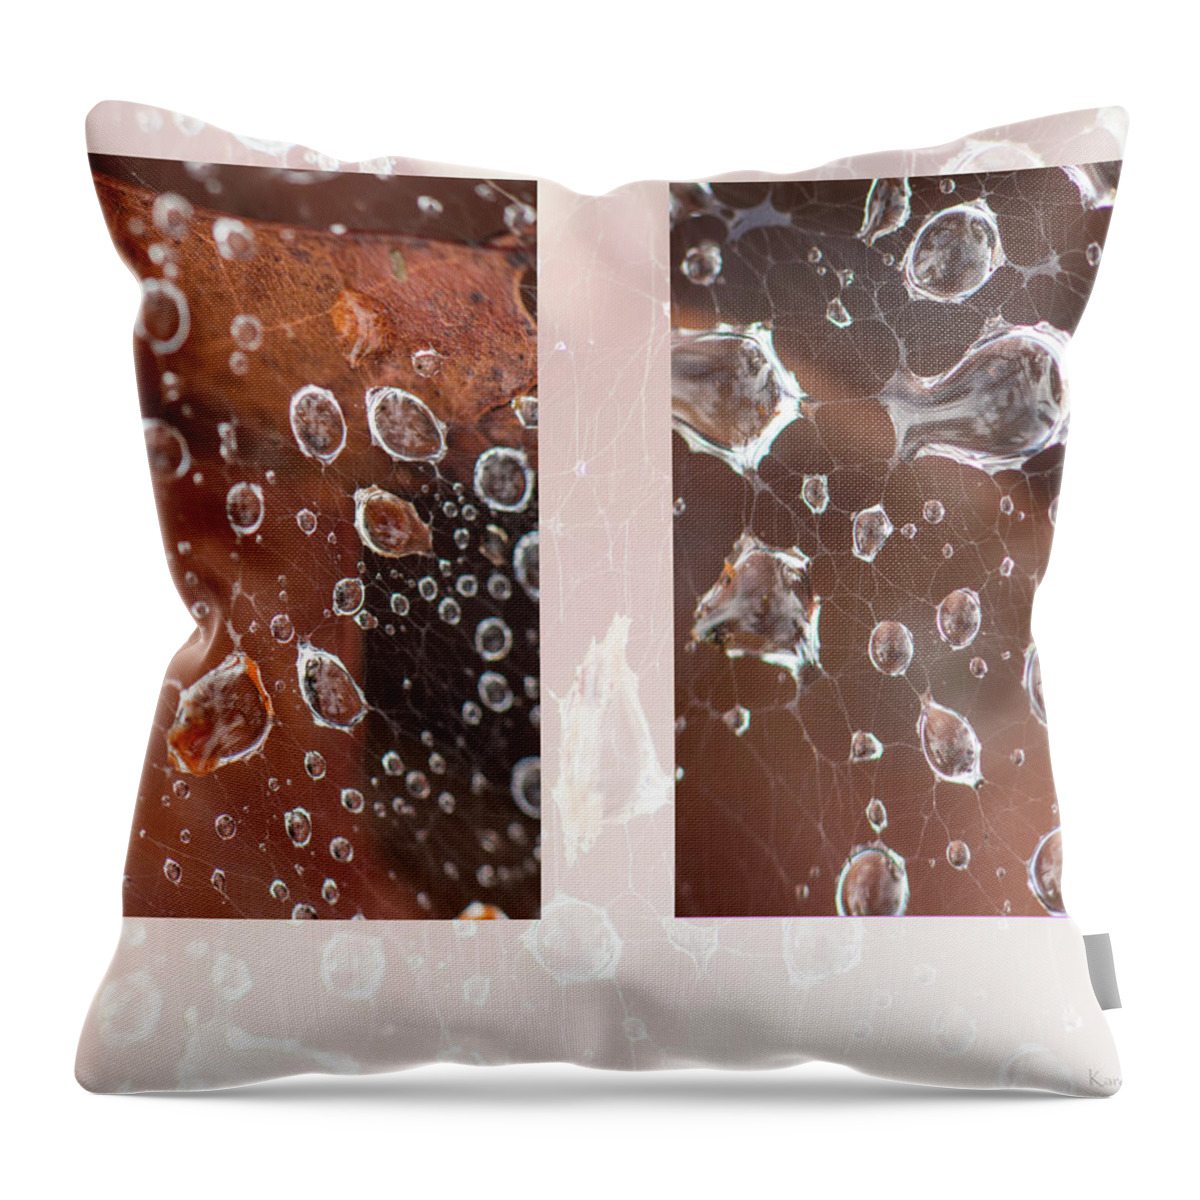 Raindrop Throw Pillow featuring the photograph Raindrops On Web by Karen Rispin